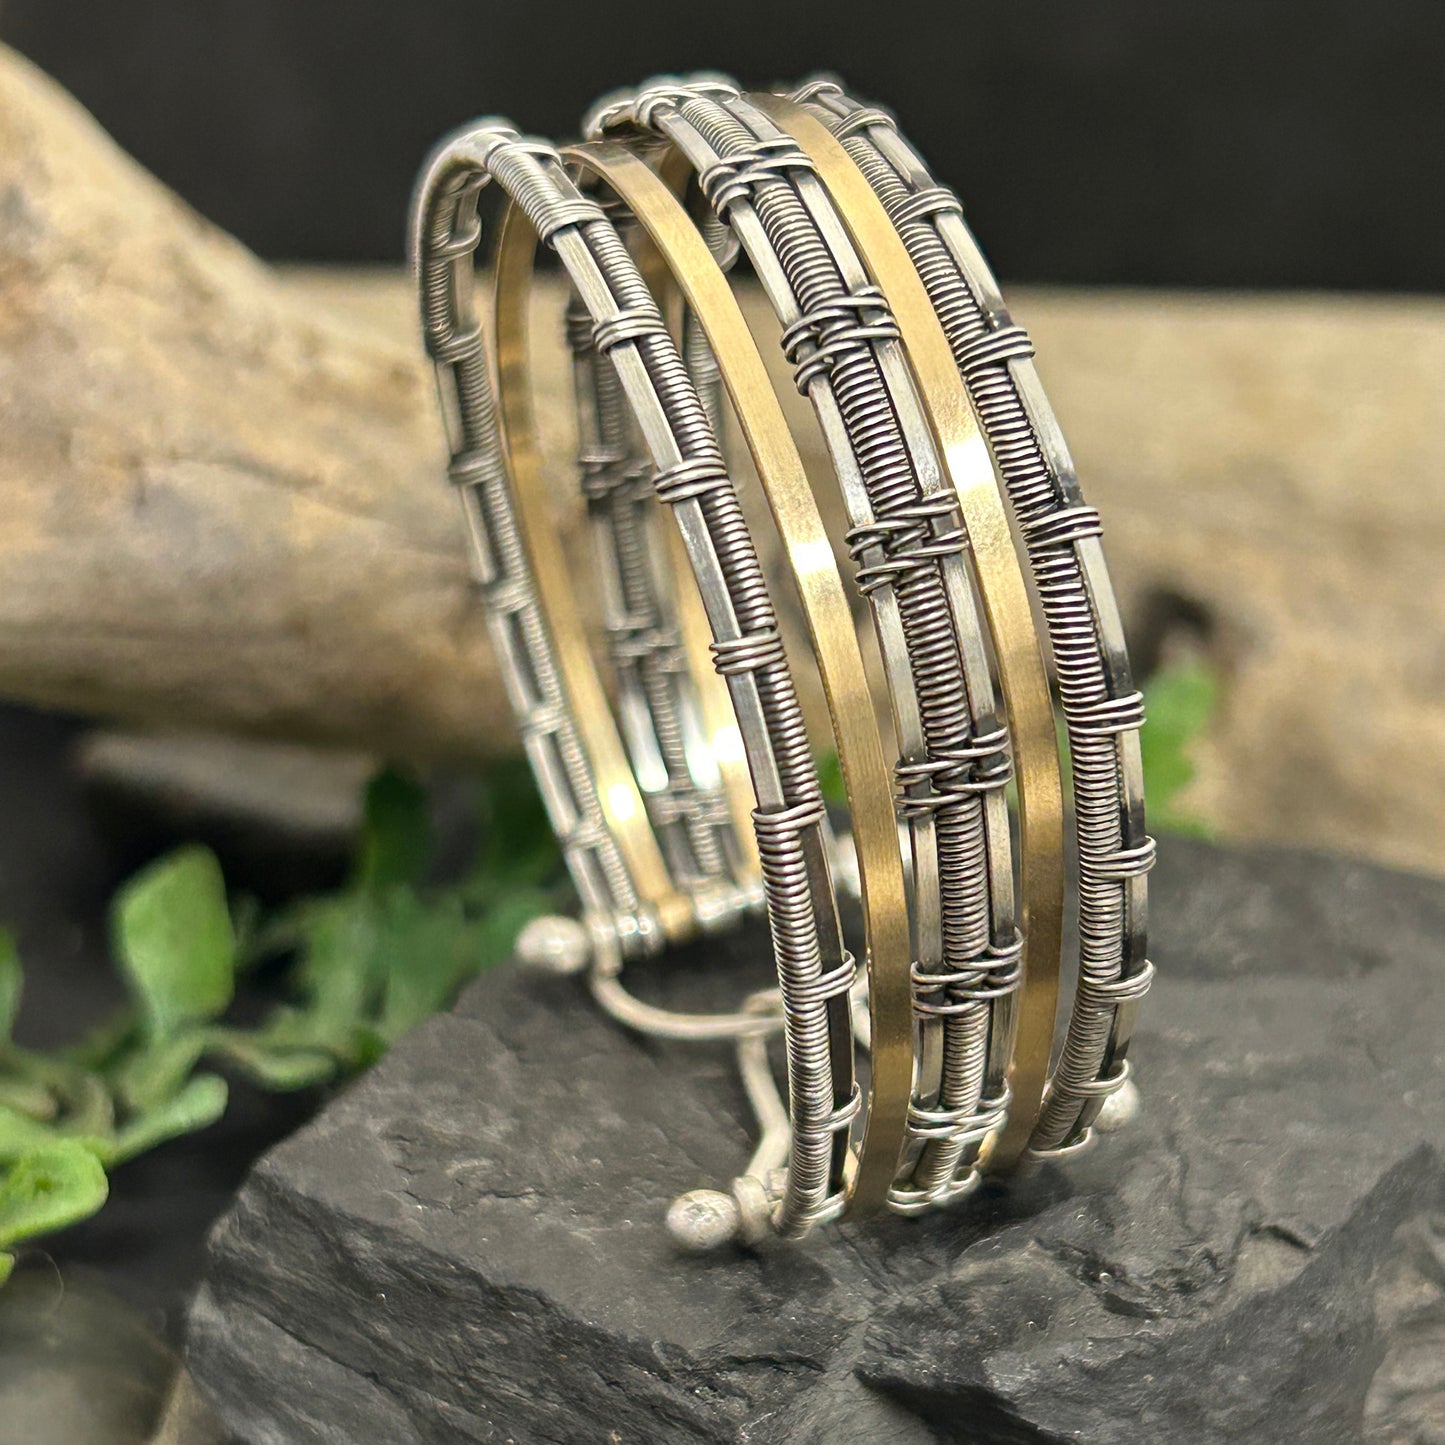 Unisex Inner Harmony Alchemy Cuff Bracelet with Handmade Clasp in Sterling and Gold